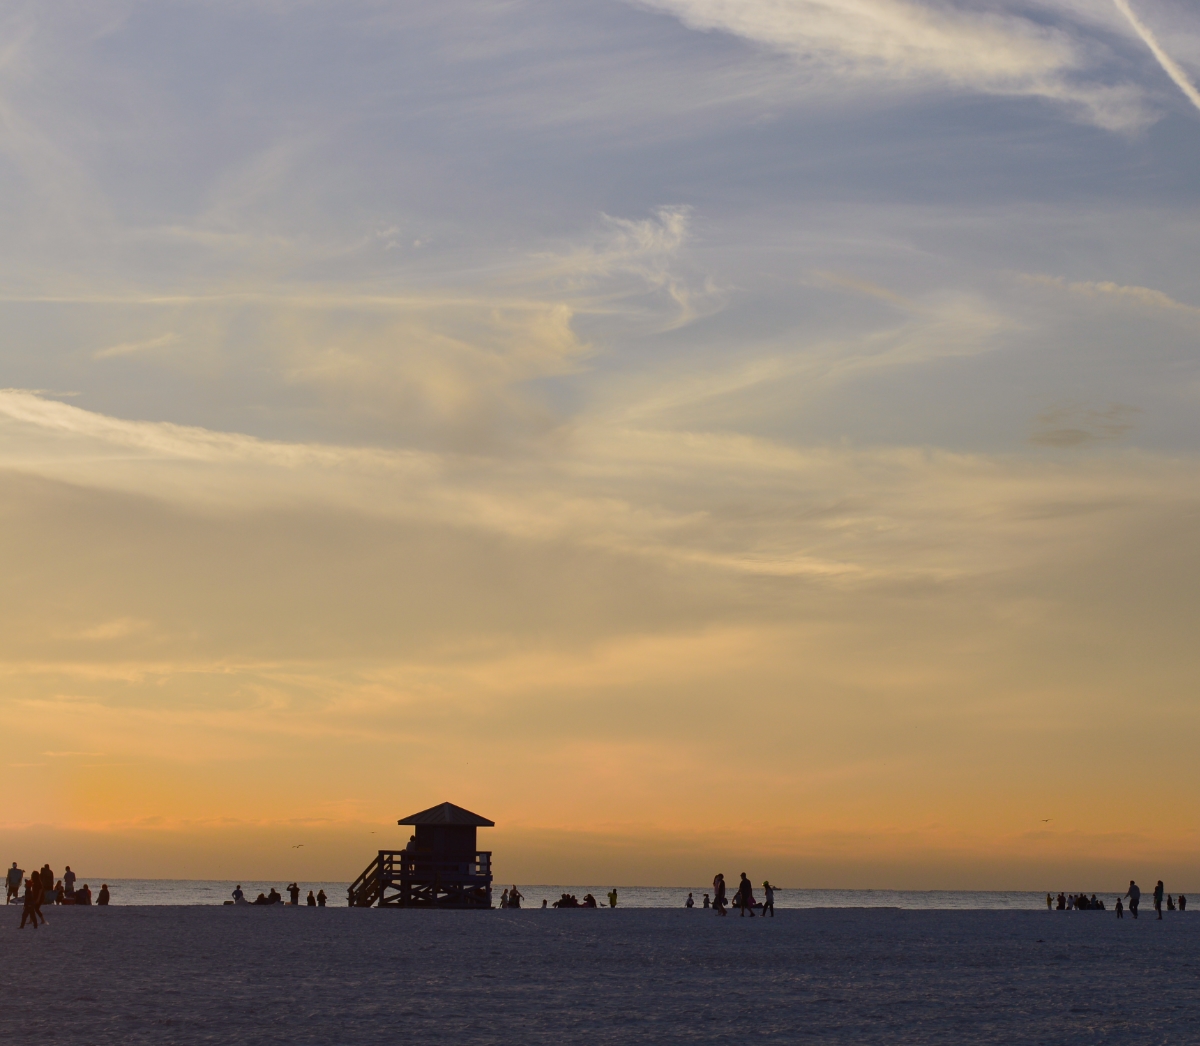 Siesta Key beach at sunset, with lifeguard stand